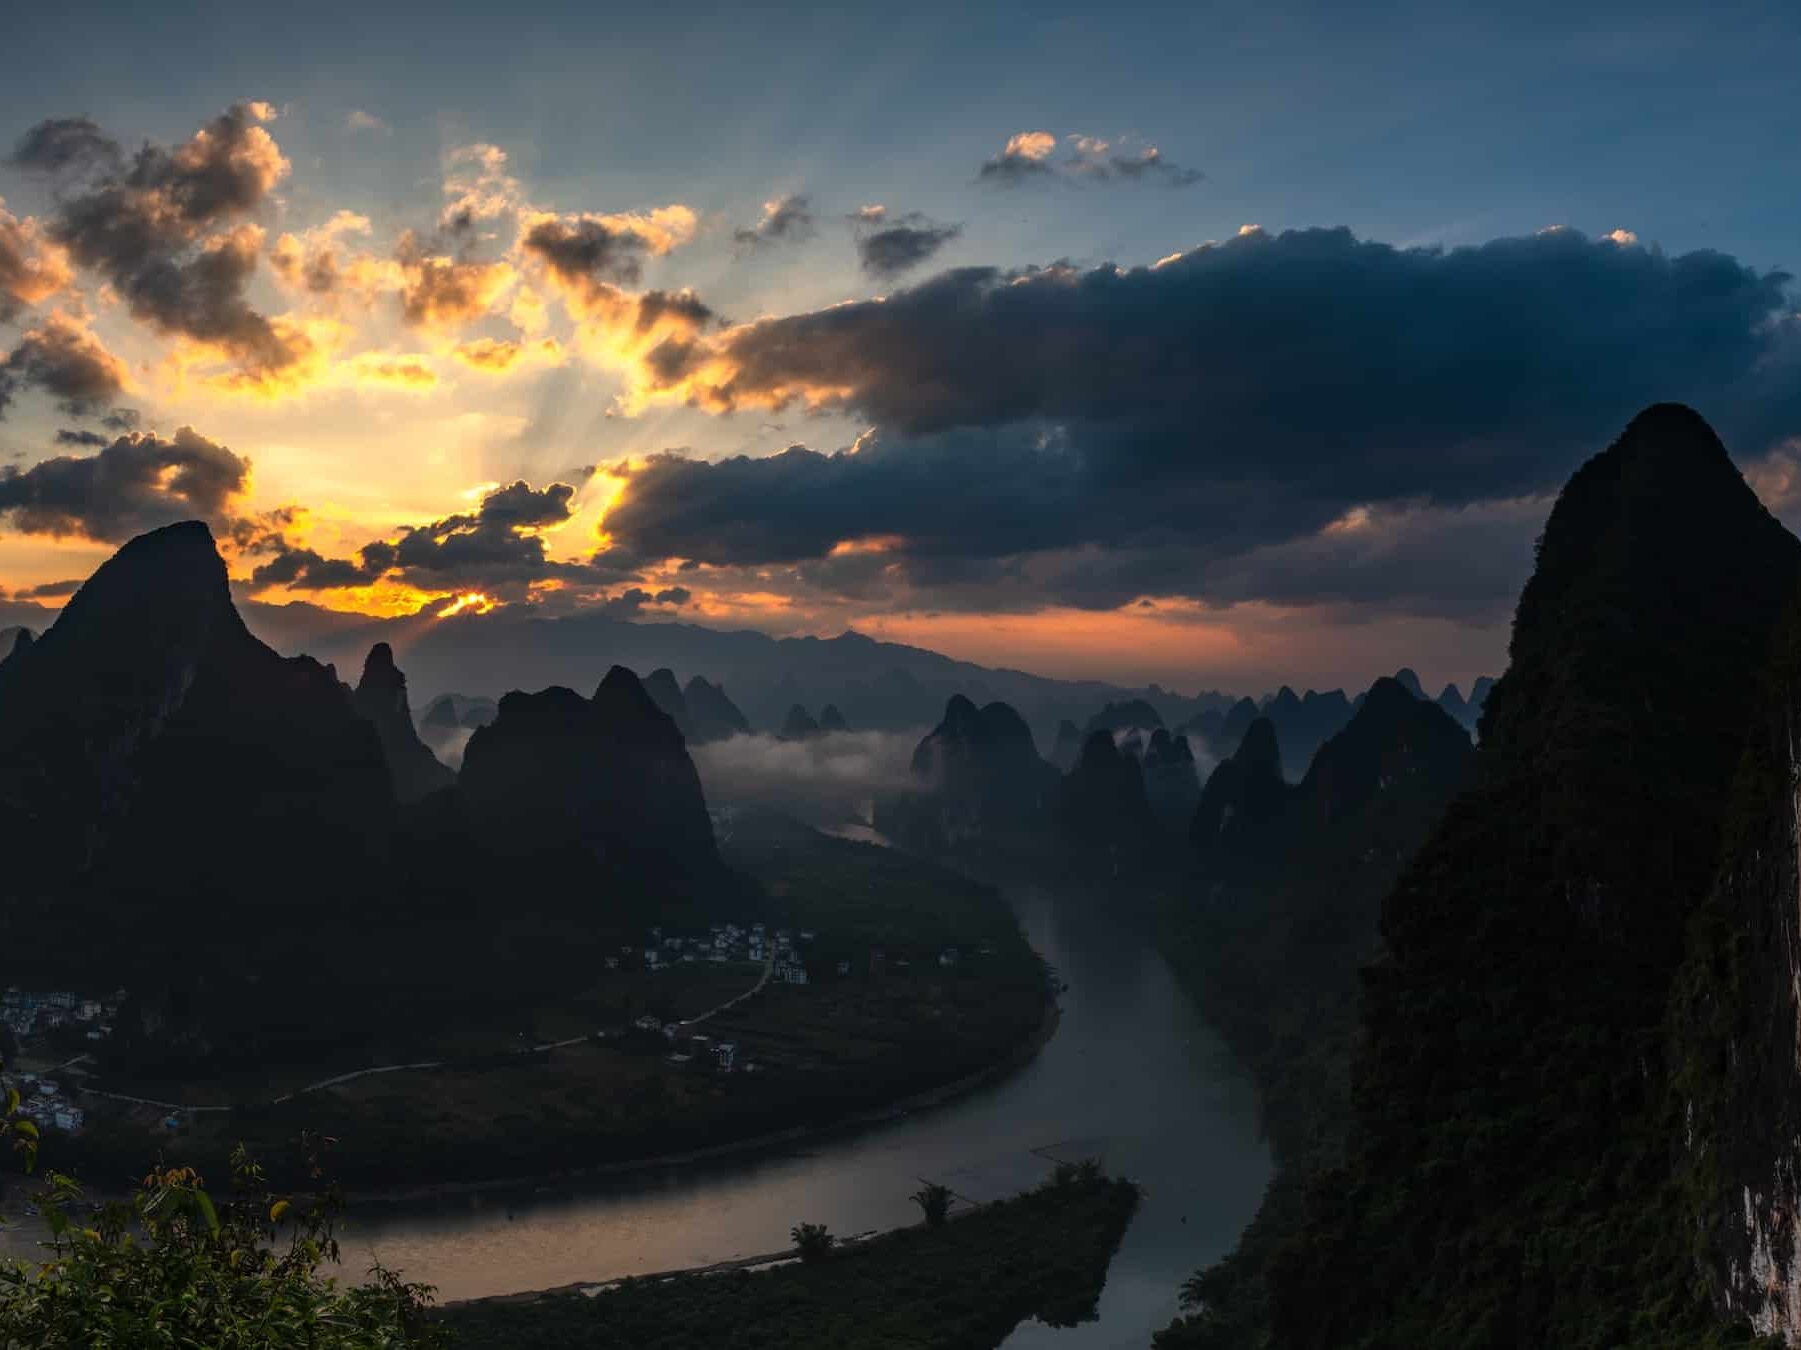 Guilin, Guangxi, China - A Sustainable Rural Tourism